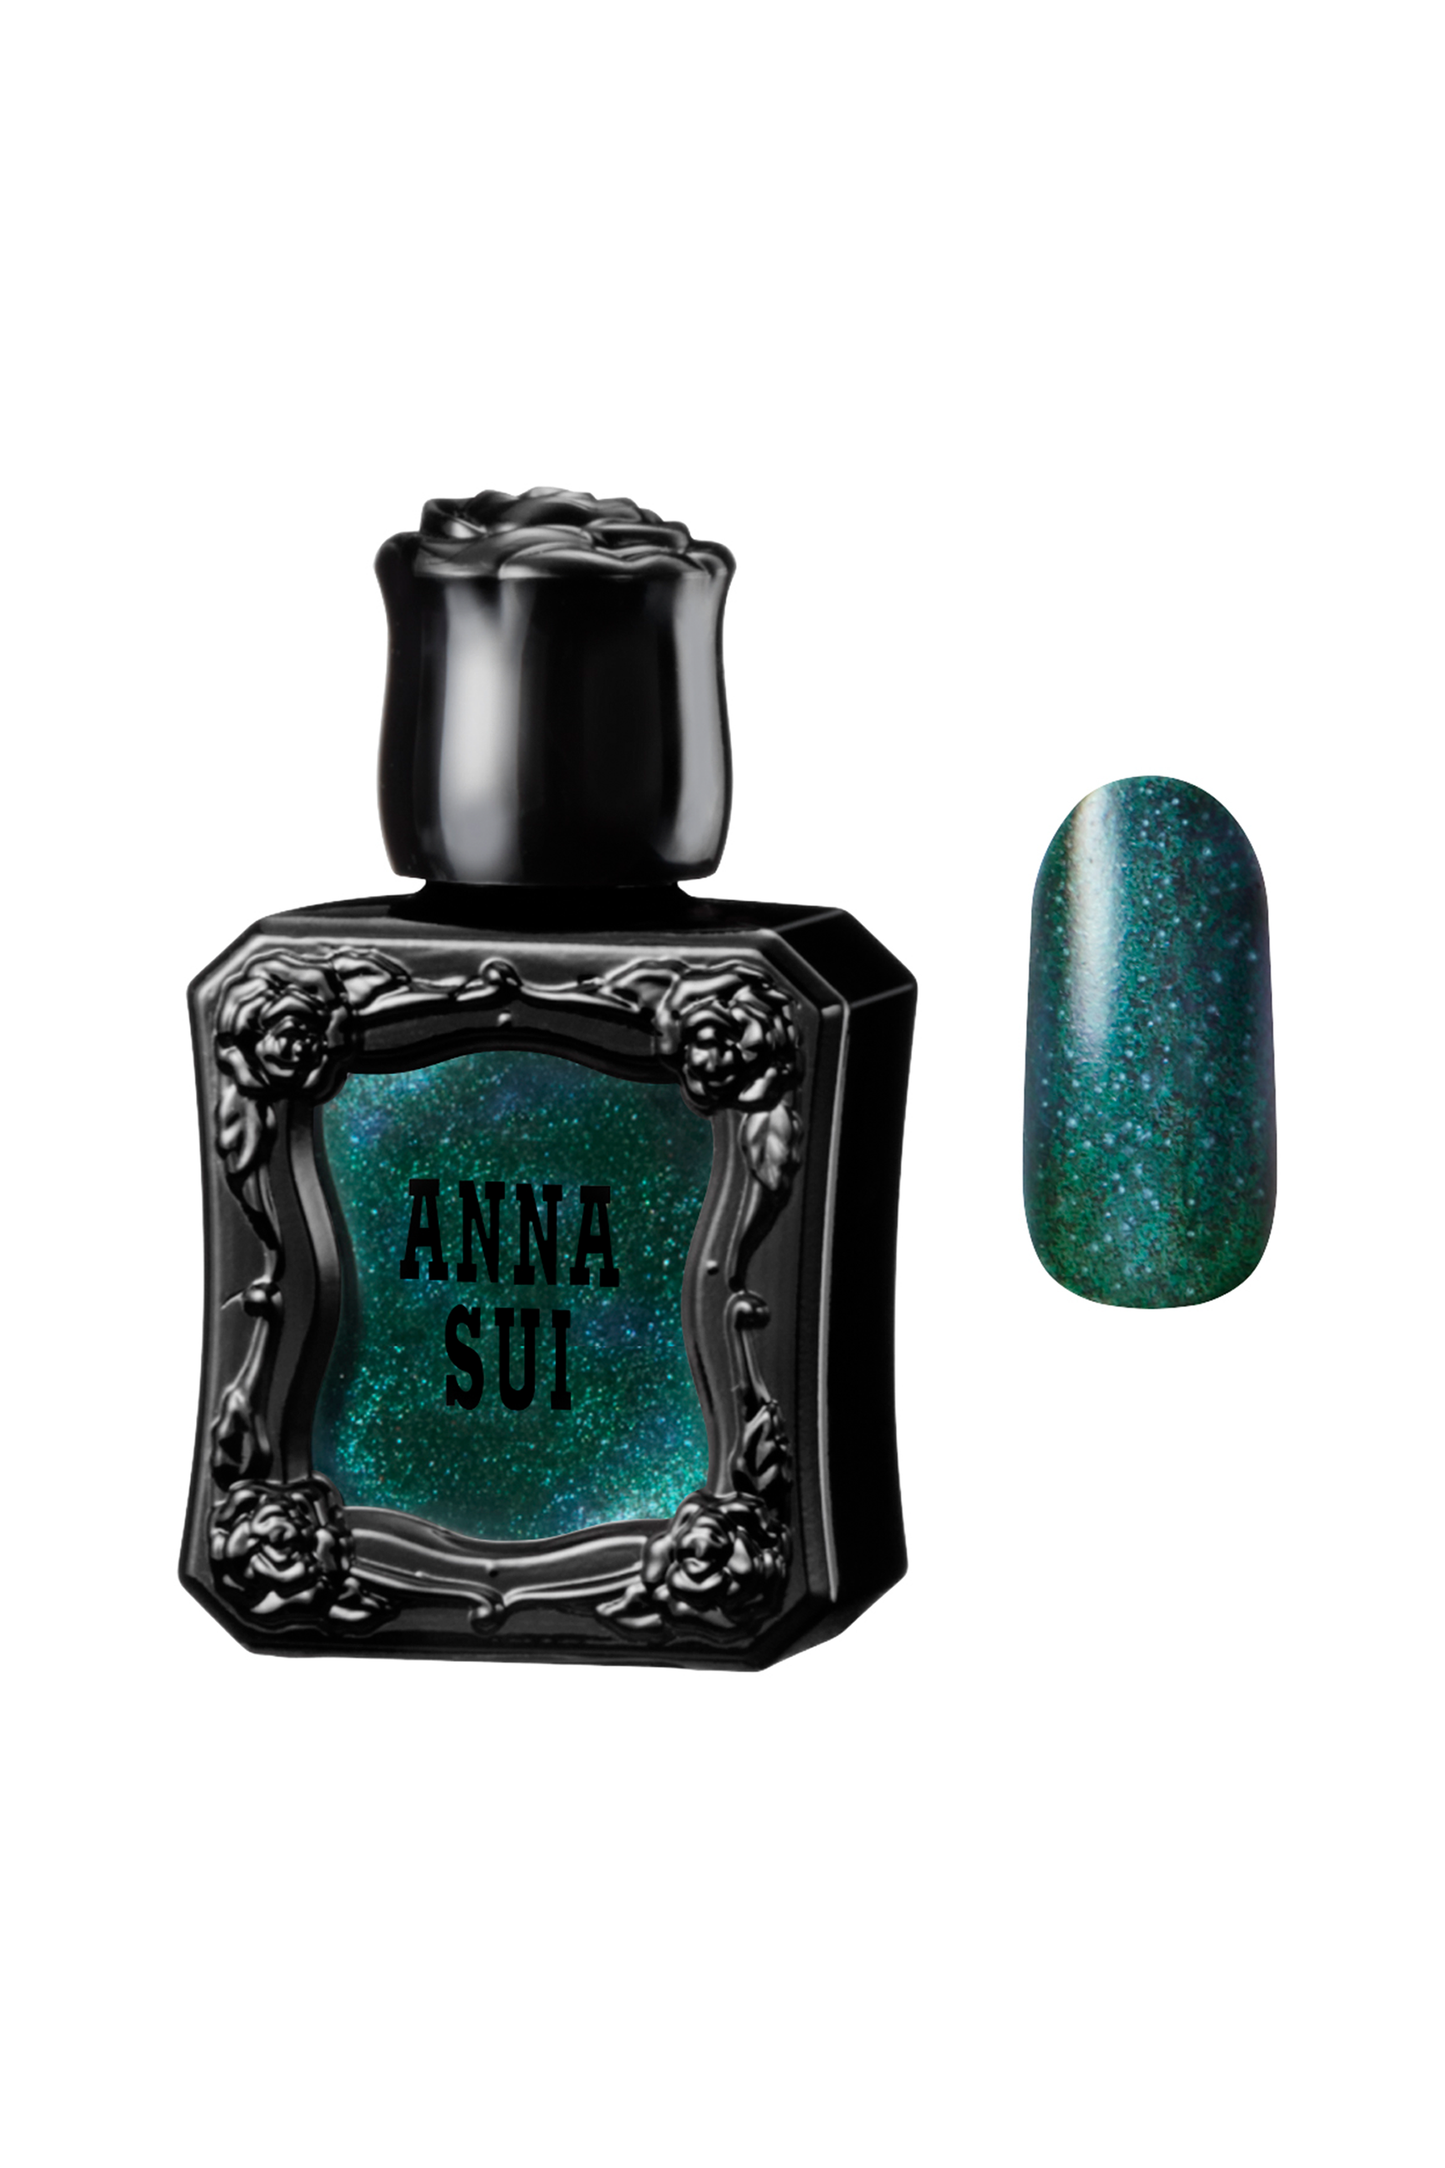 EMERALD Nail Polish bottle raised rose pattern, Anna Sui in black over nail colors in bottle front